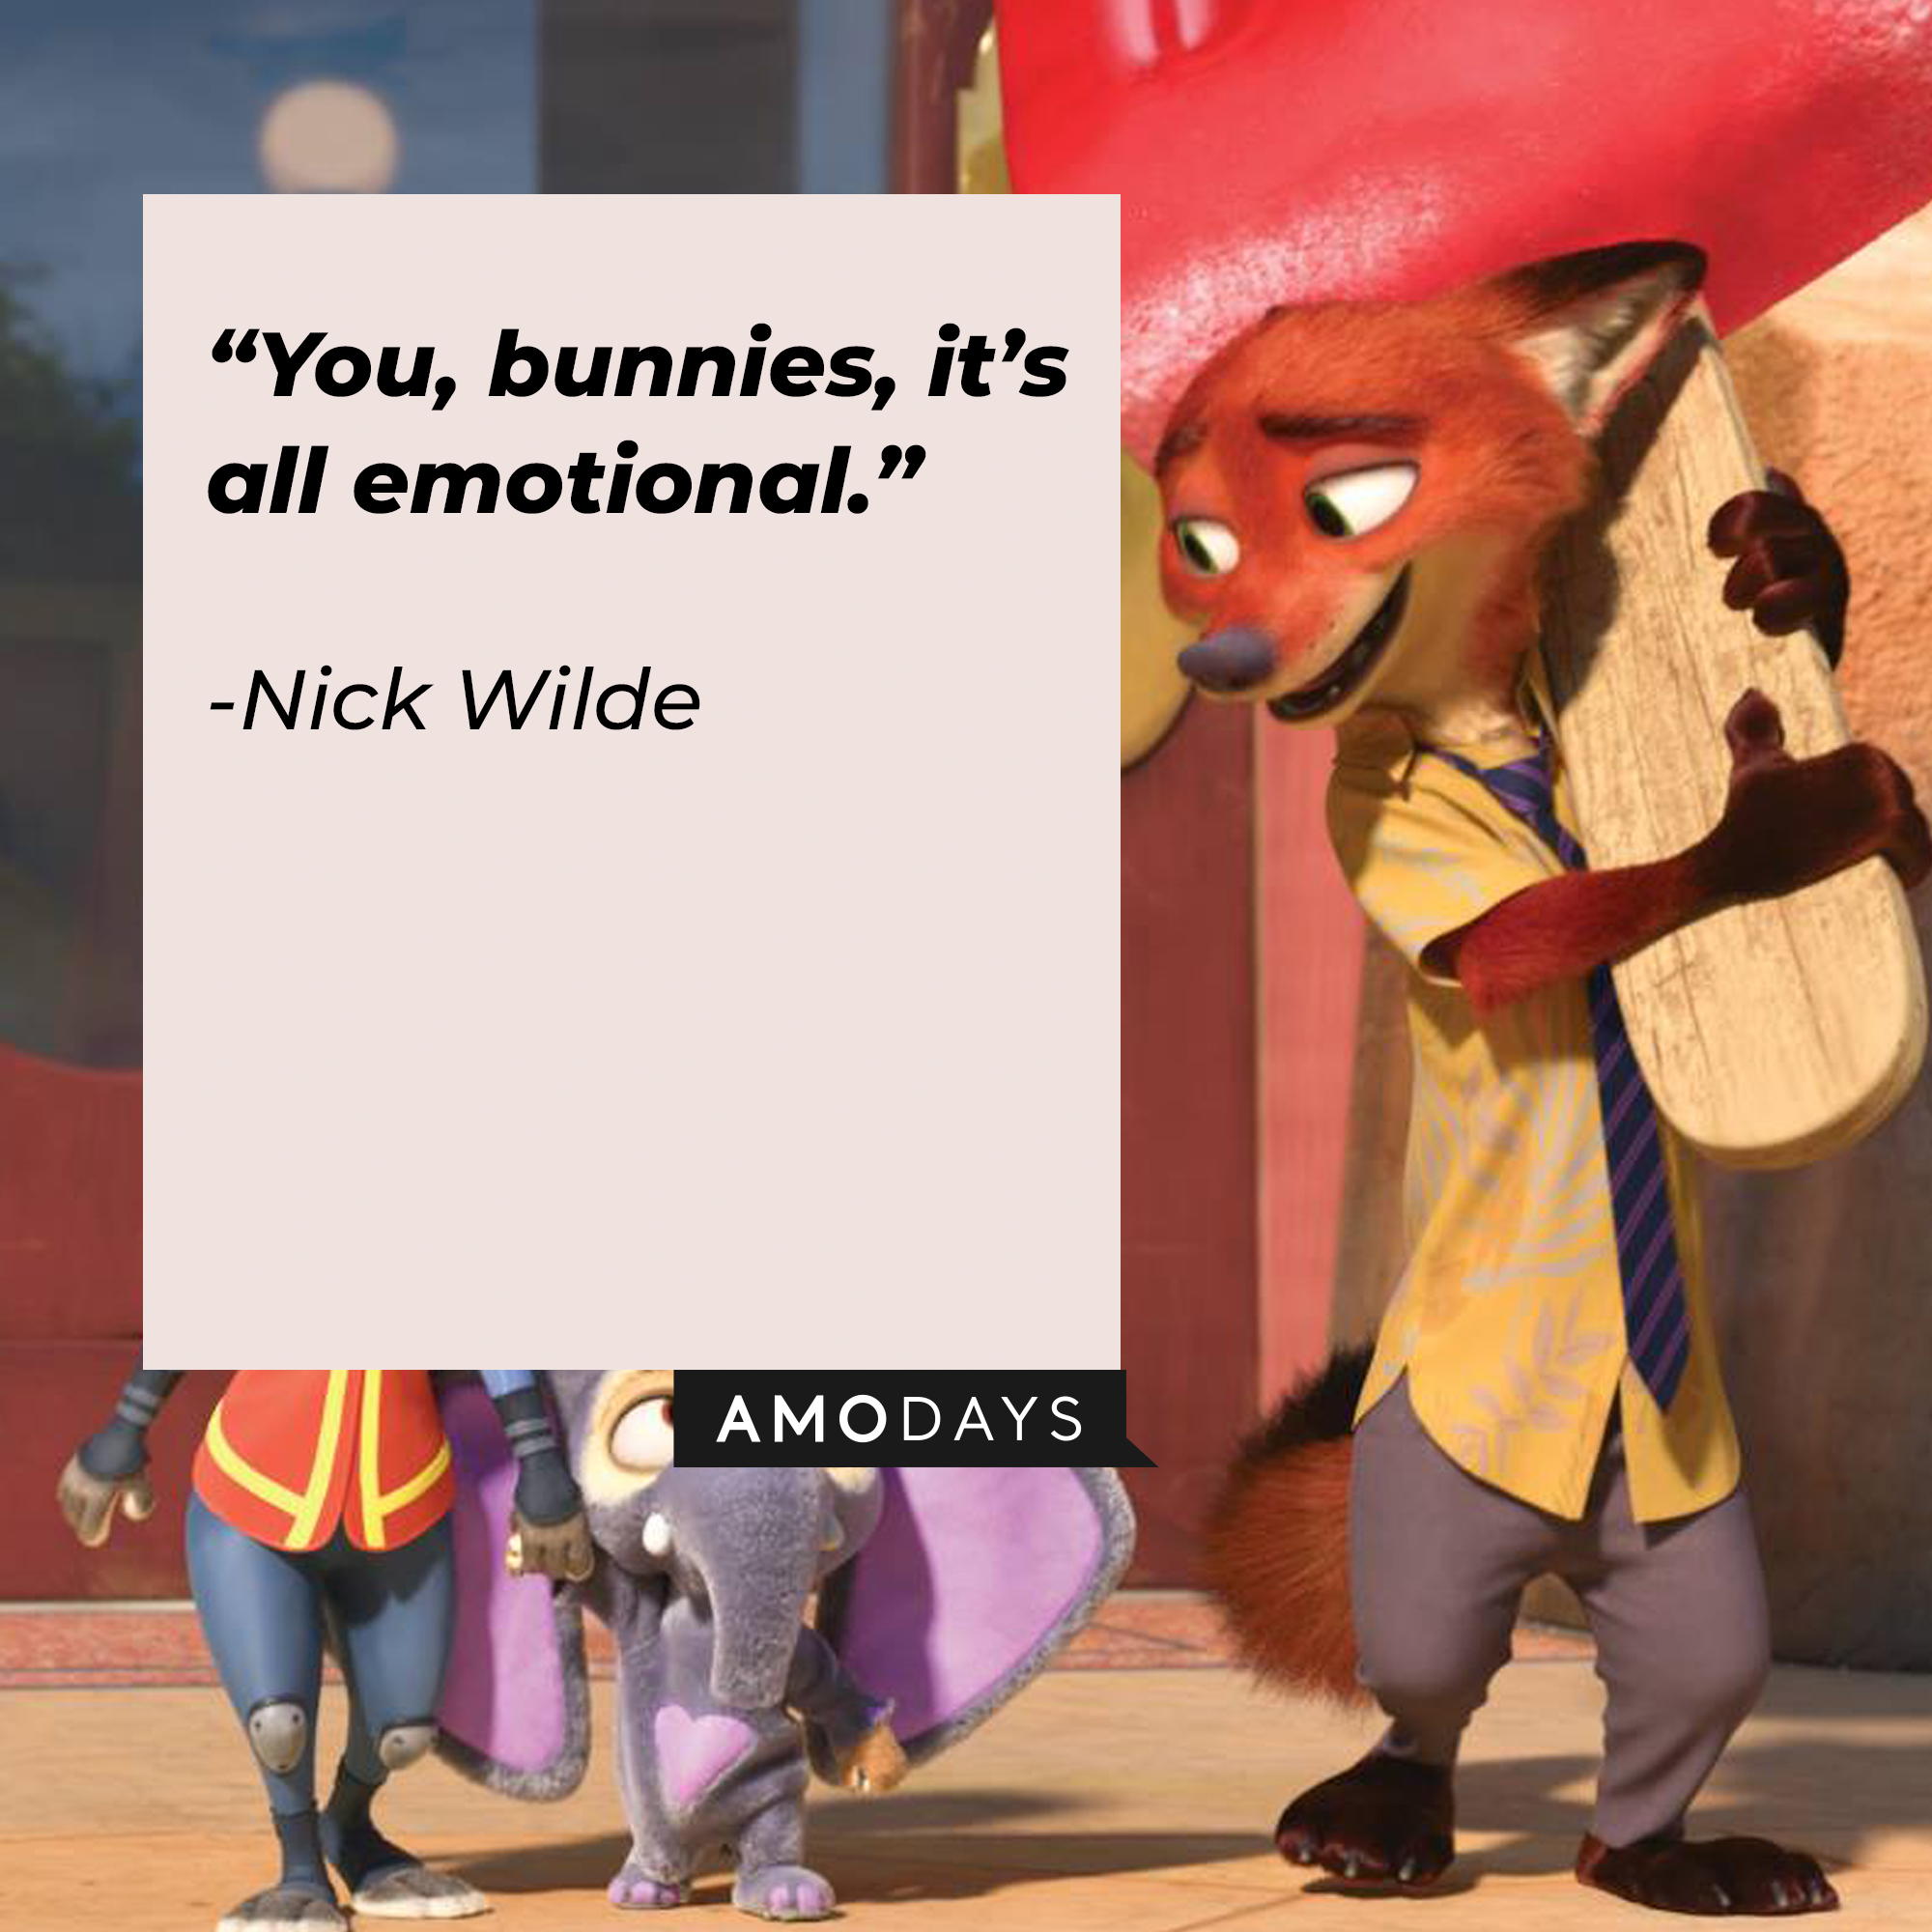 Nick Wilde, with his quote: “You, bunnies, it’s all emotional.” | Source: facebook.com/DisneyZootopia